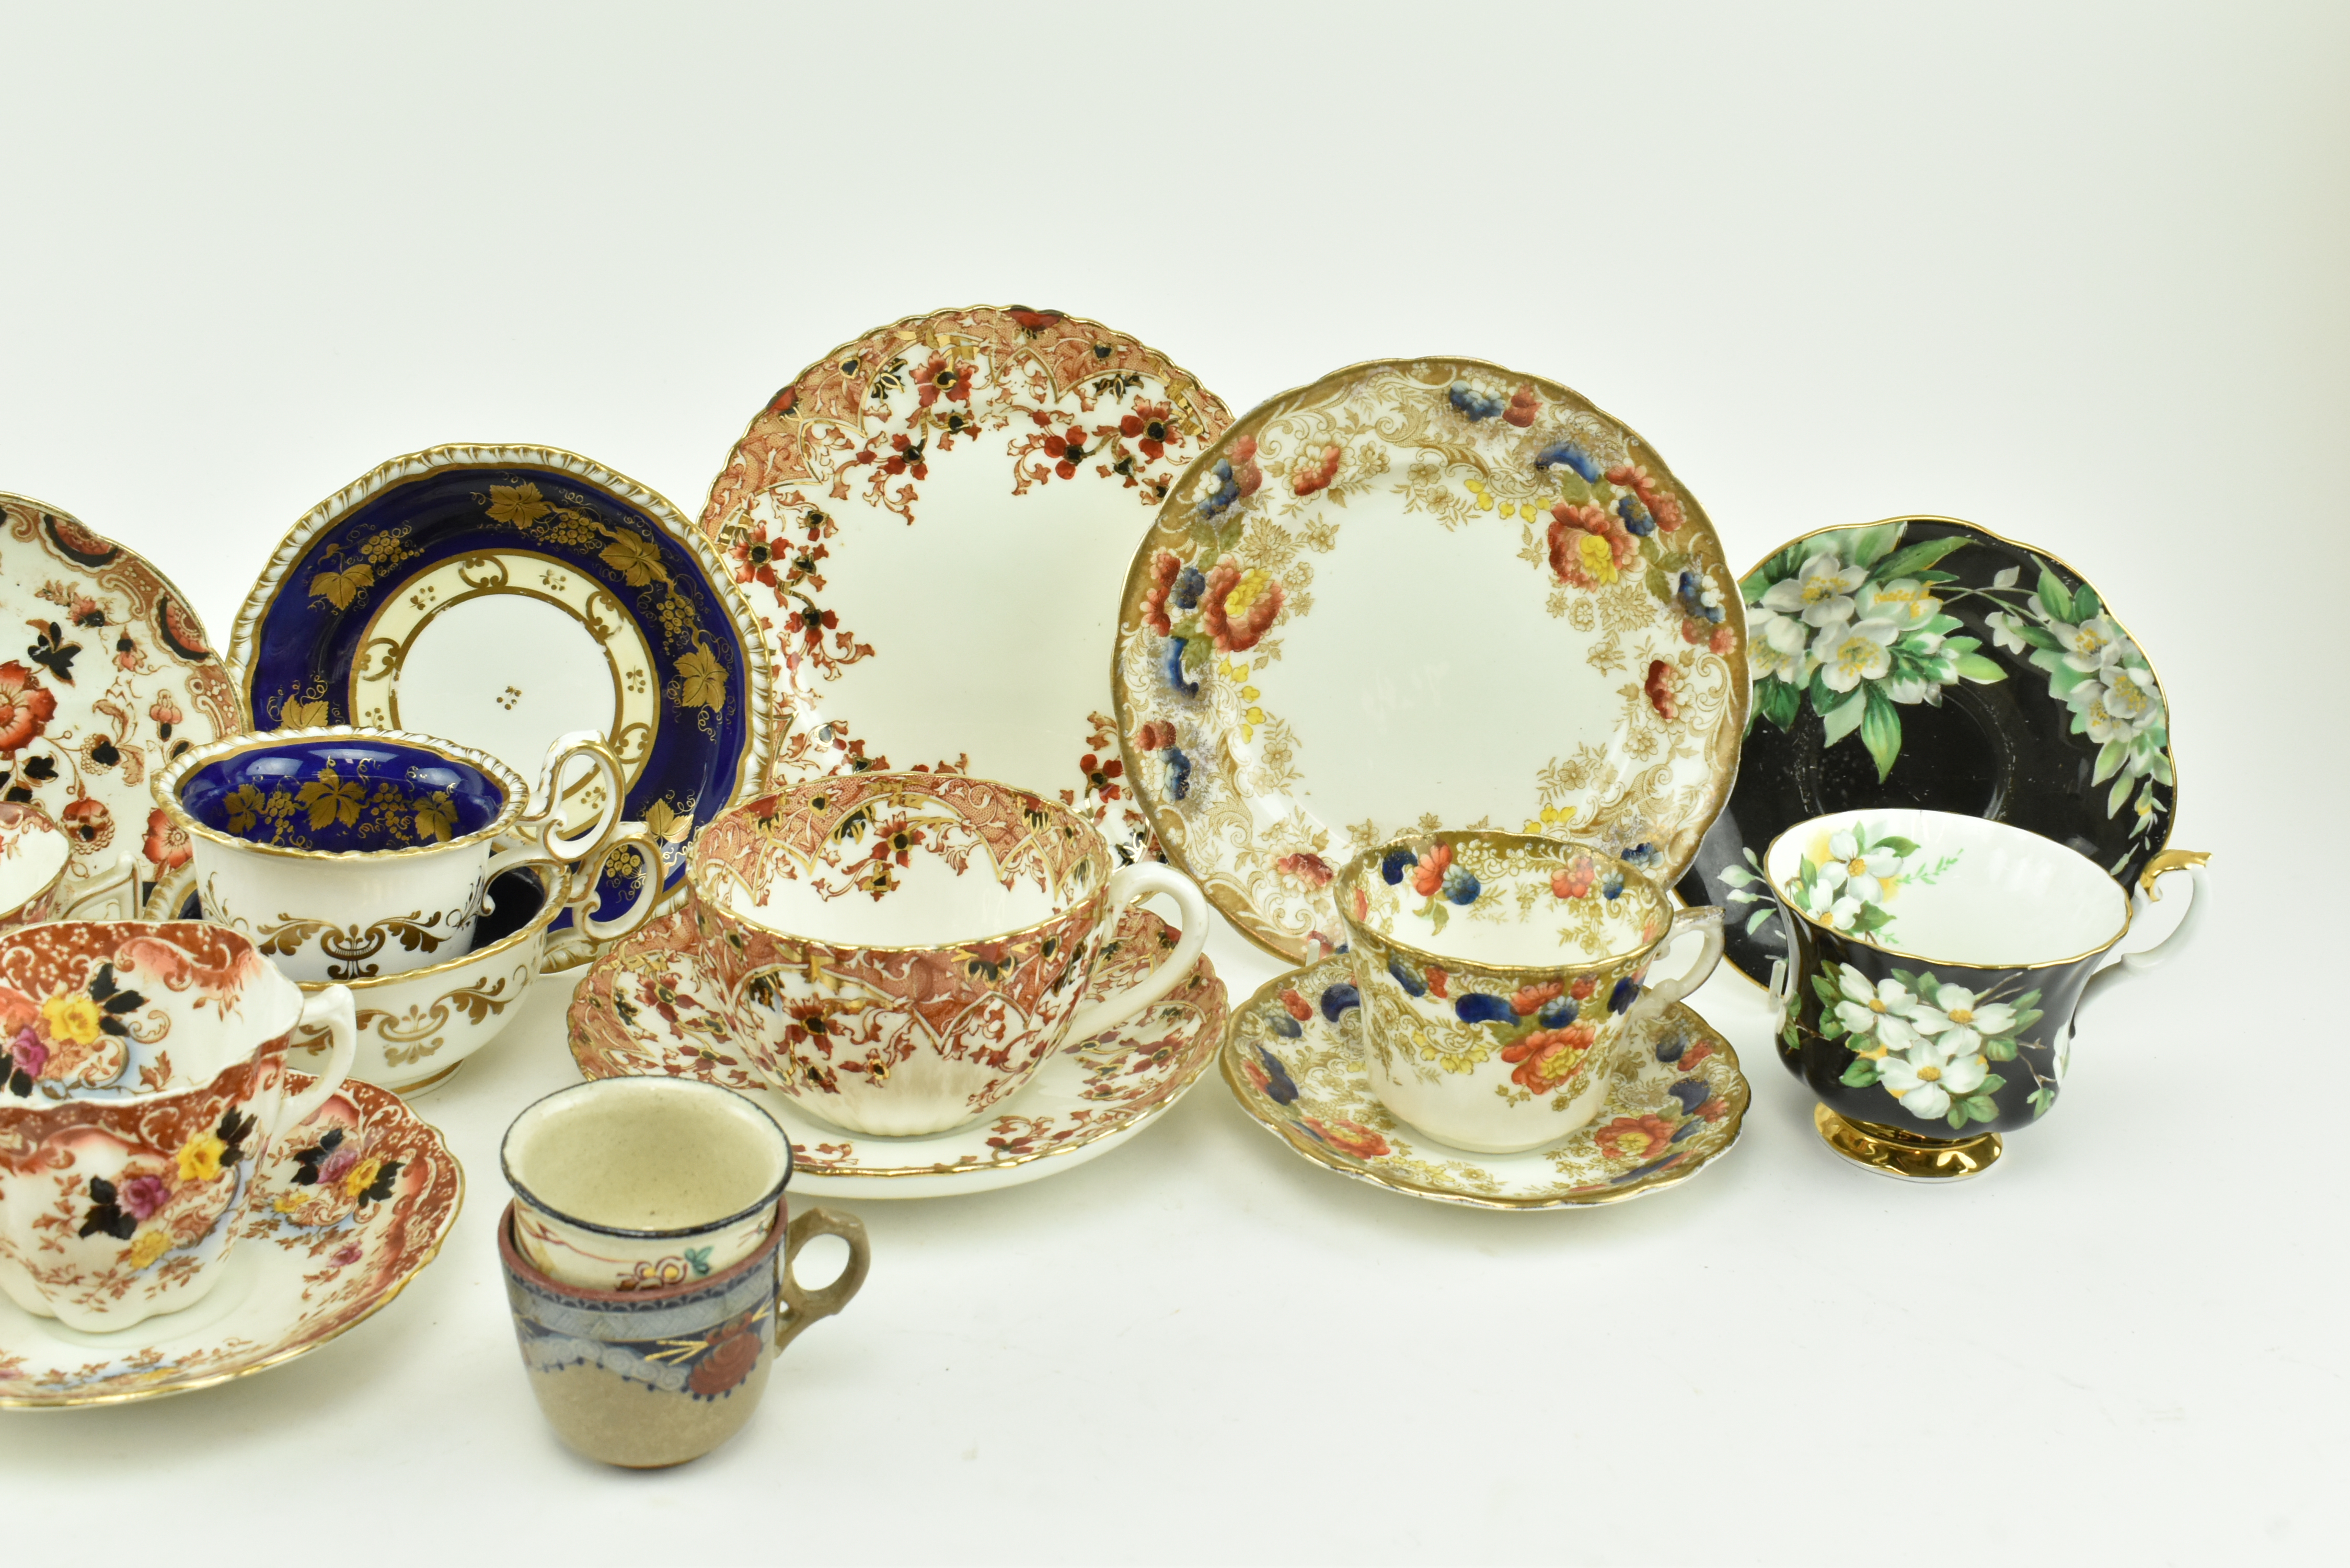 COLLECTION OF 19TH CENTURY PORCELAIN TEACUPS & SAUCERS - Image 3 of 13